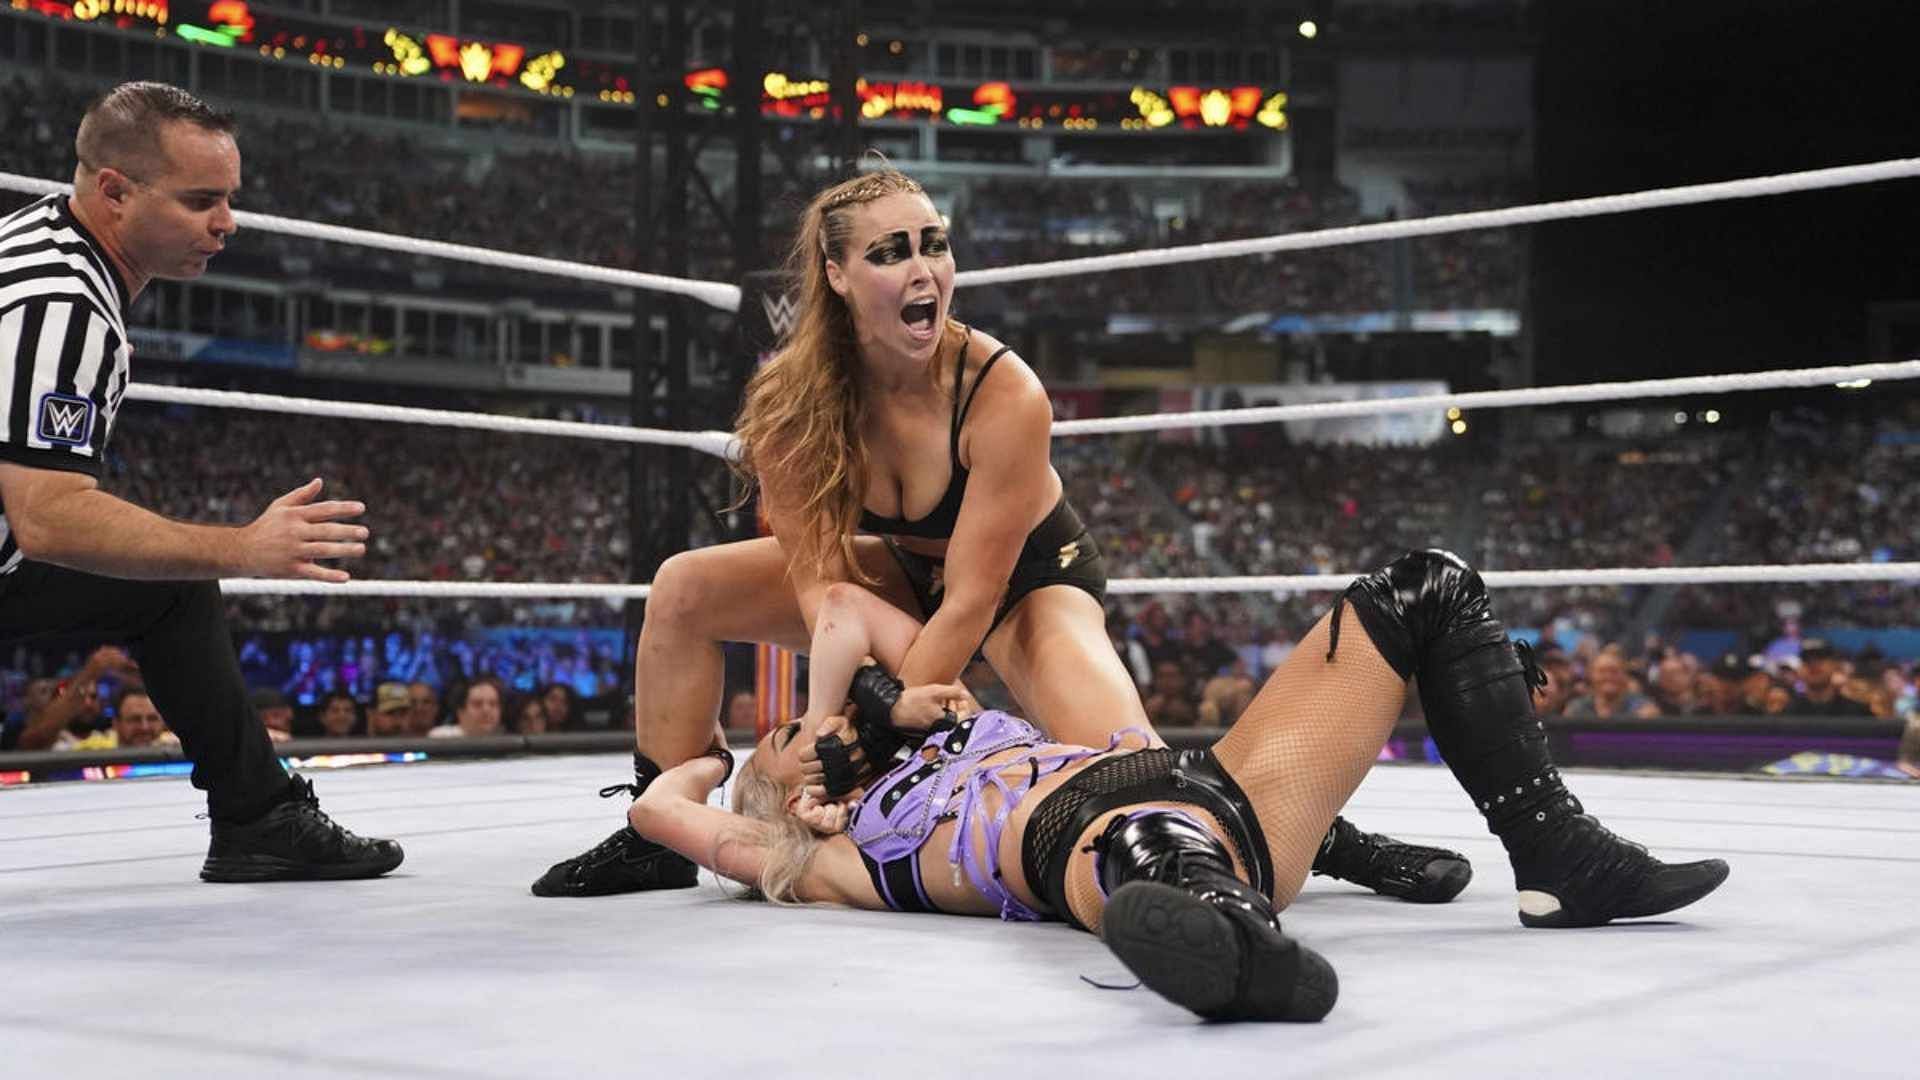 The rivalry between Ronda Rousey and Liv Morgan has been fierce